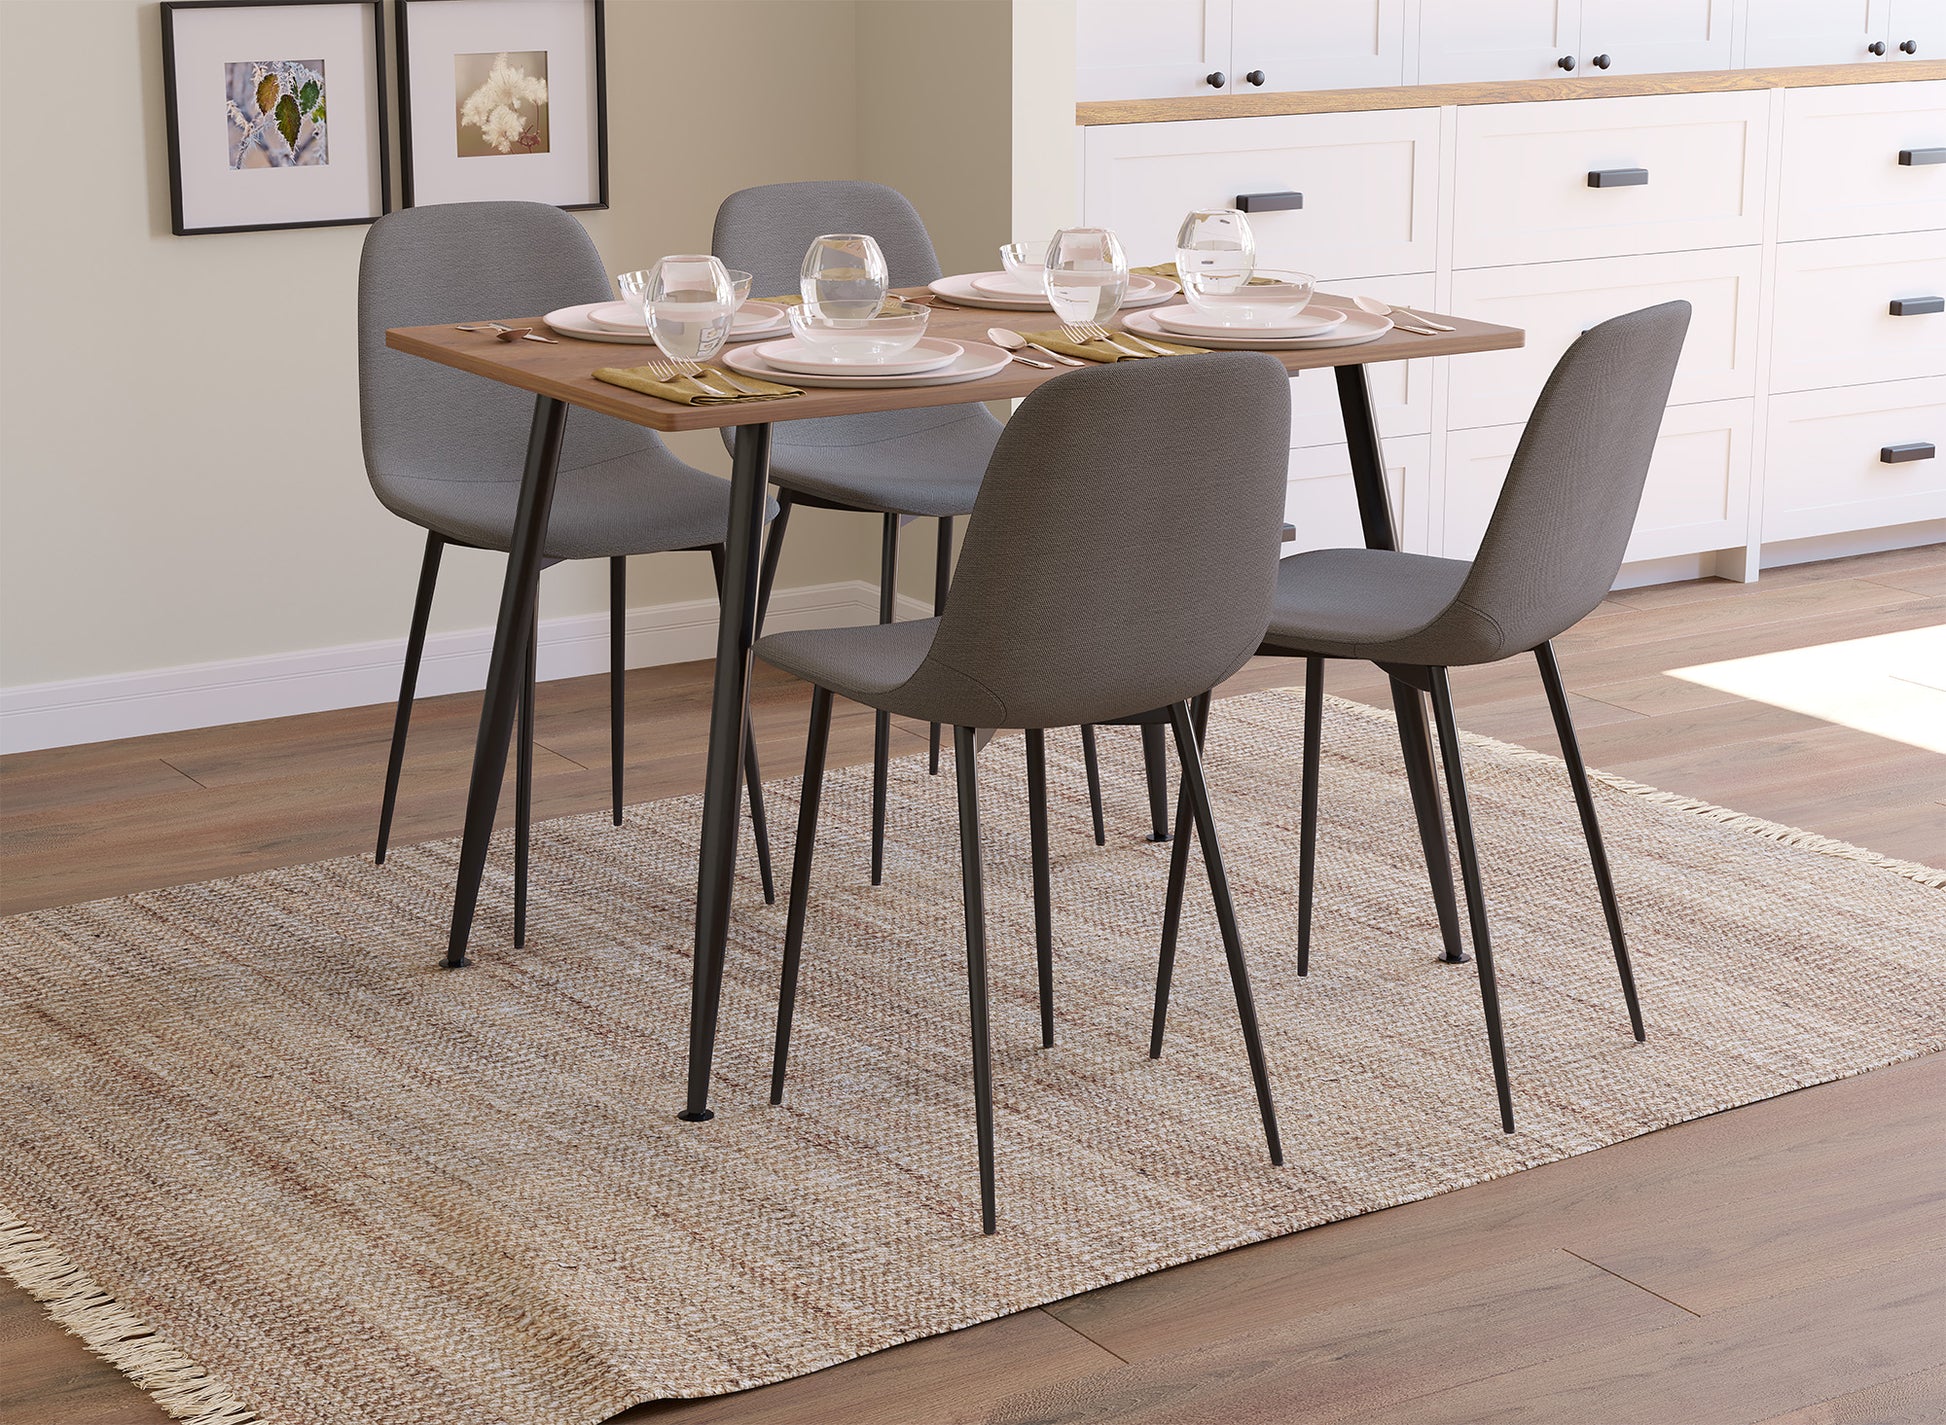 5 Piece Dining Set 1 Table, 4 Chairs